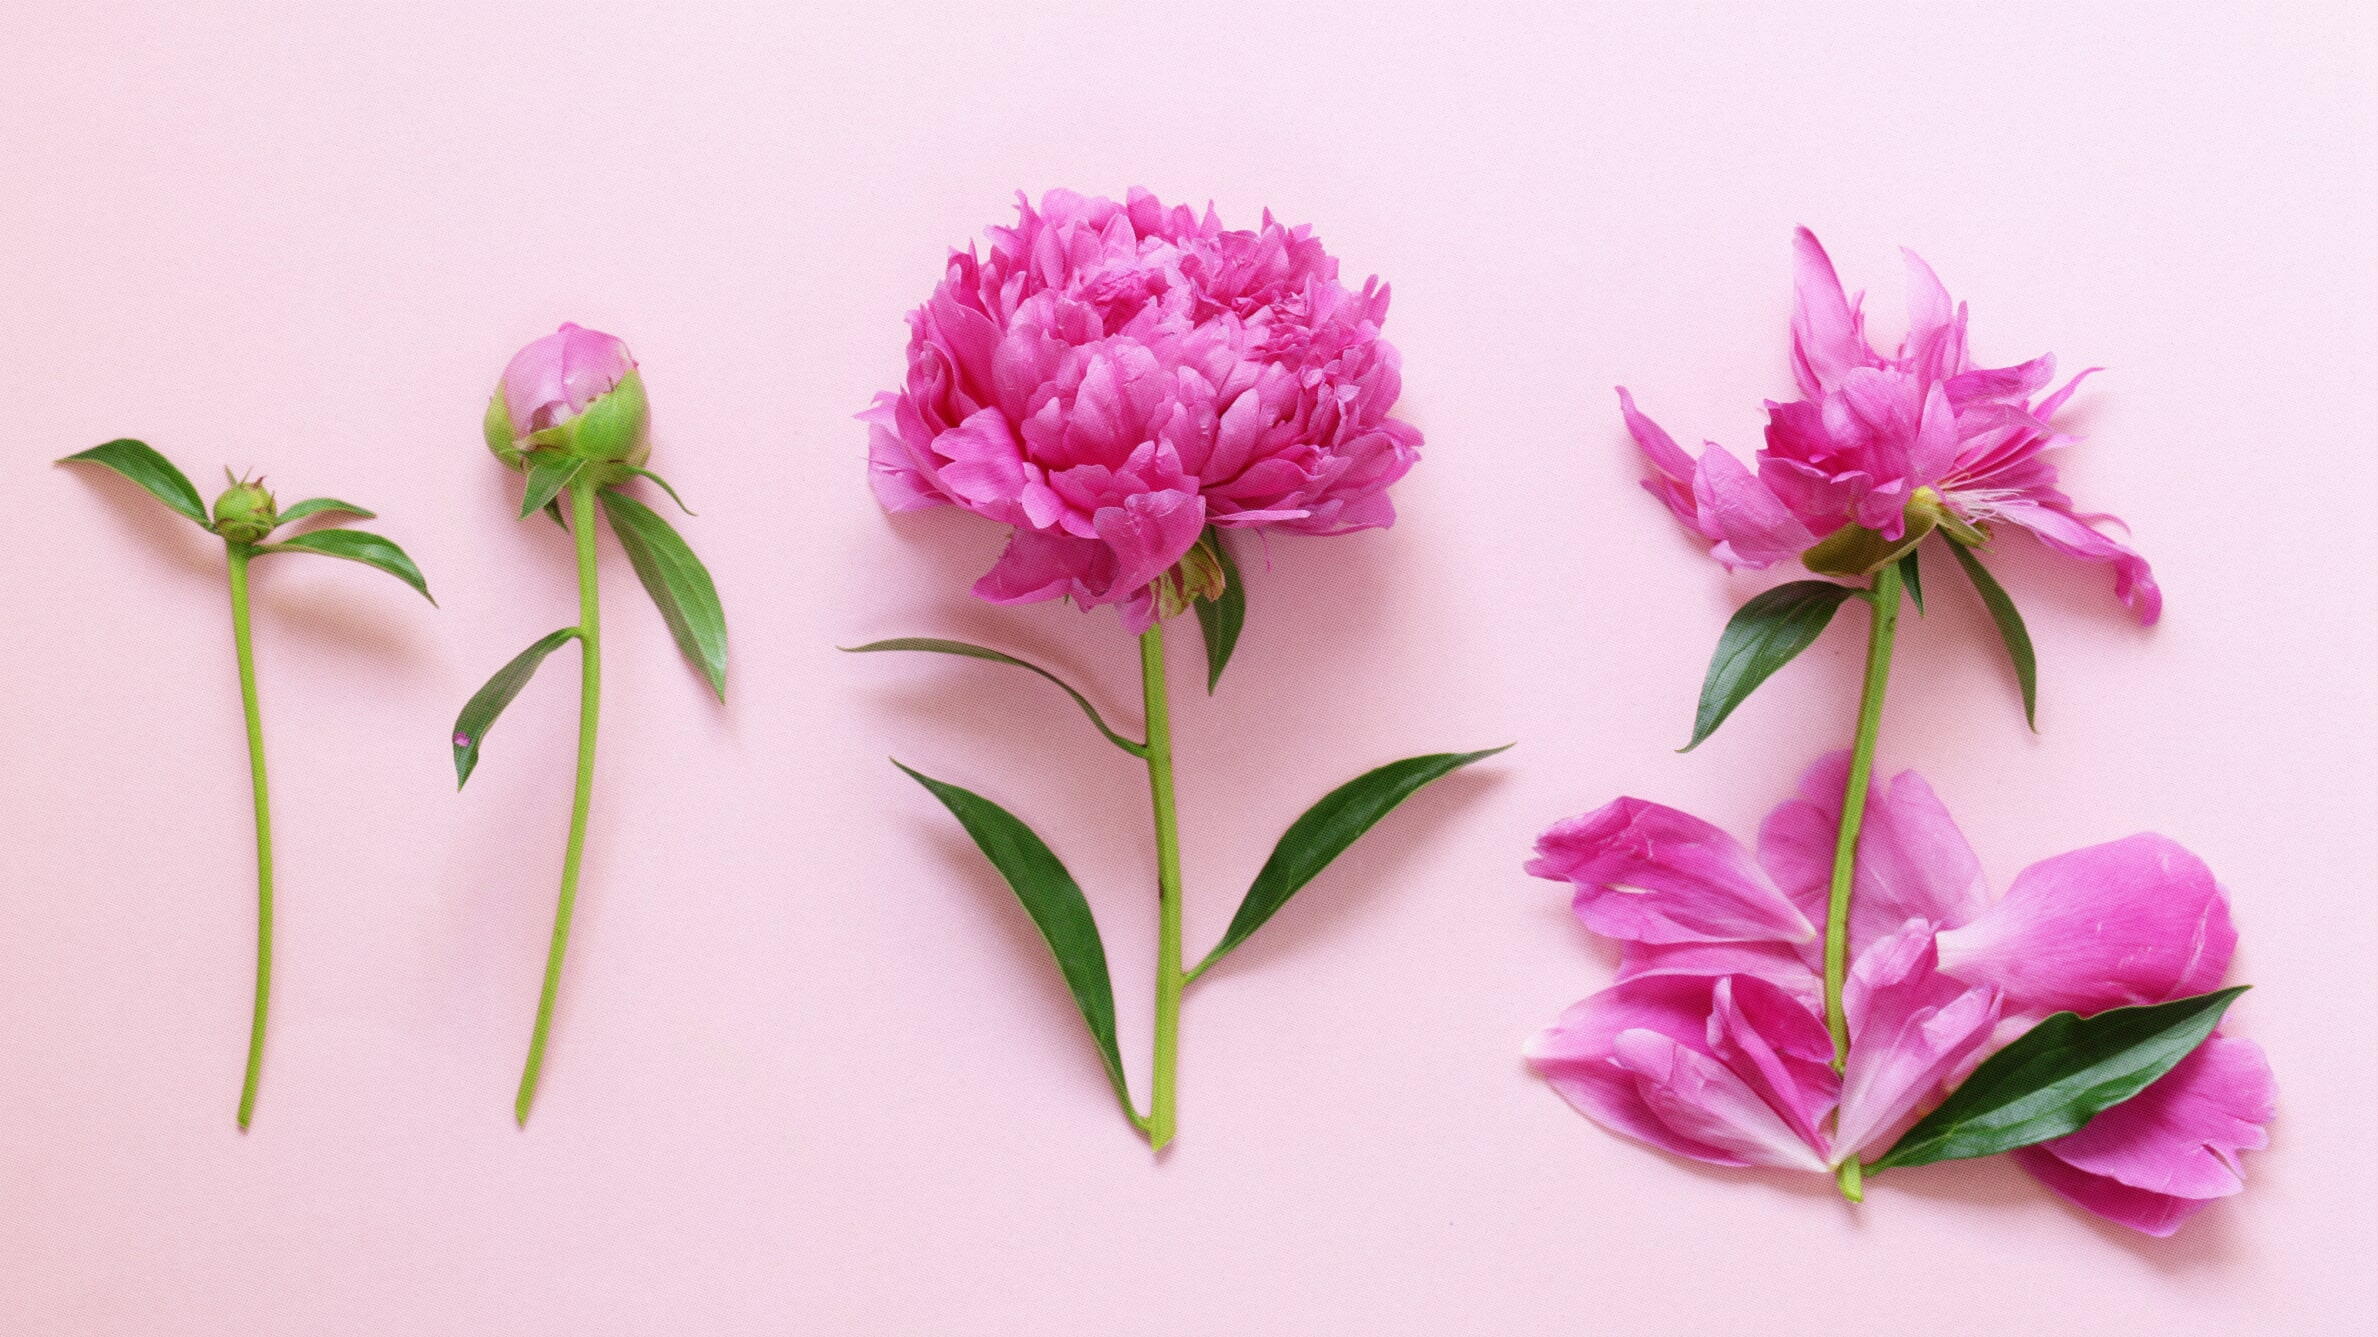 Stages of peony blooms